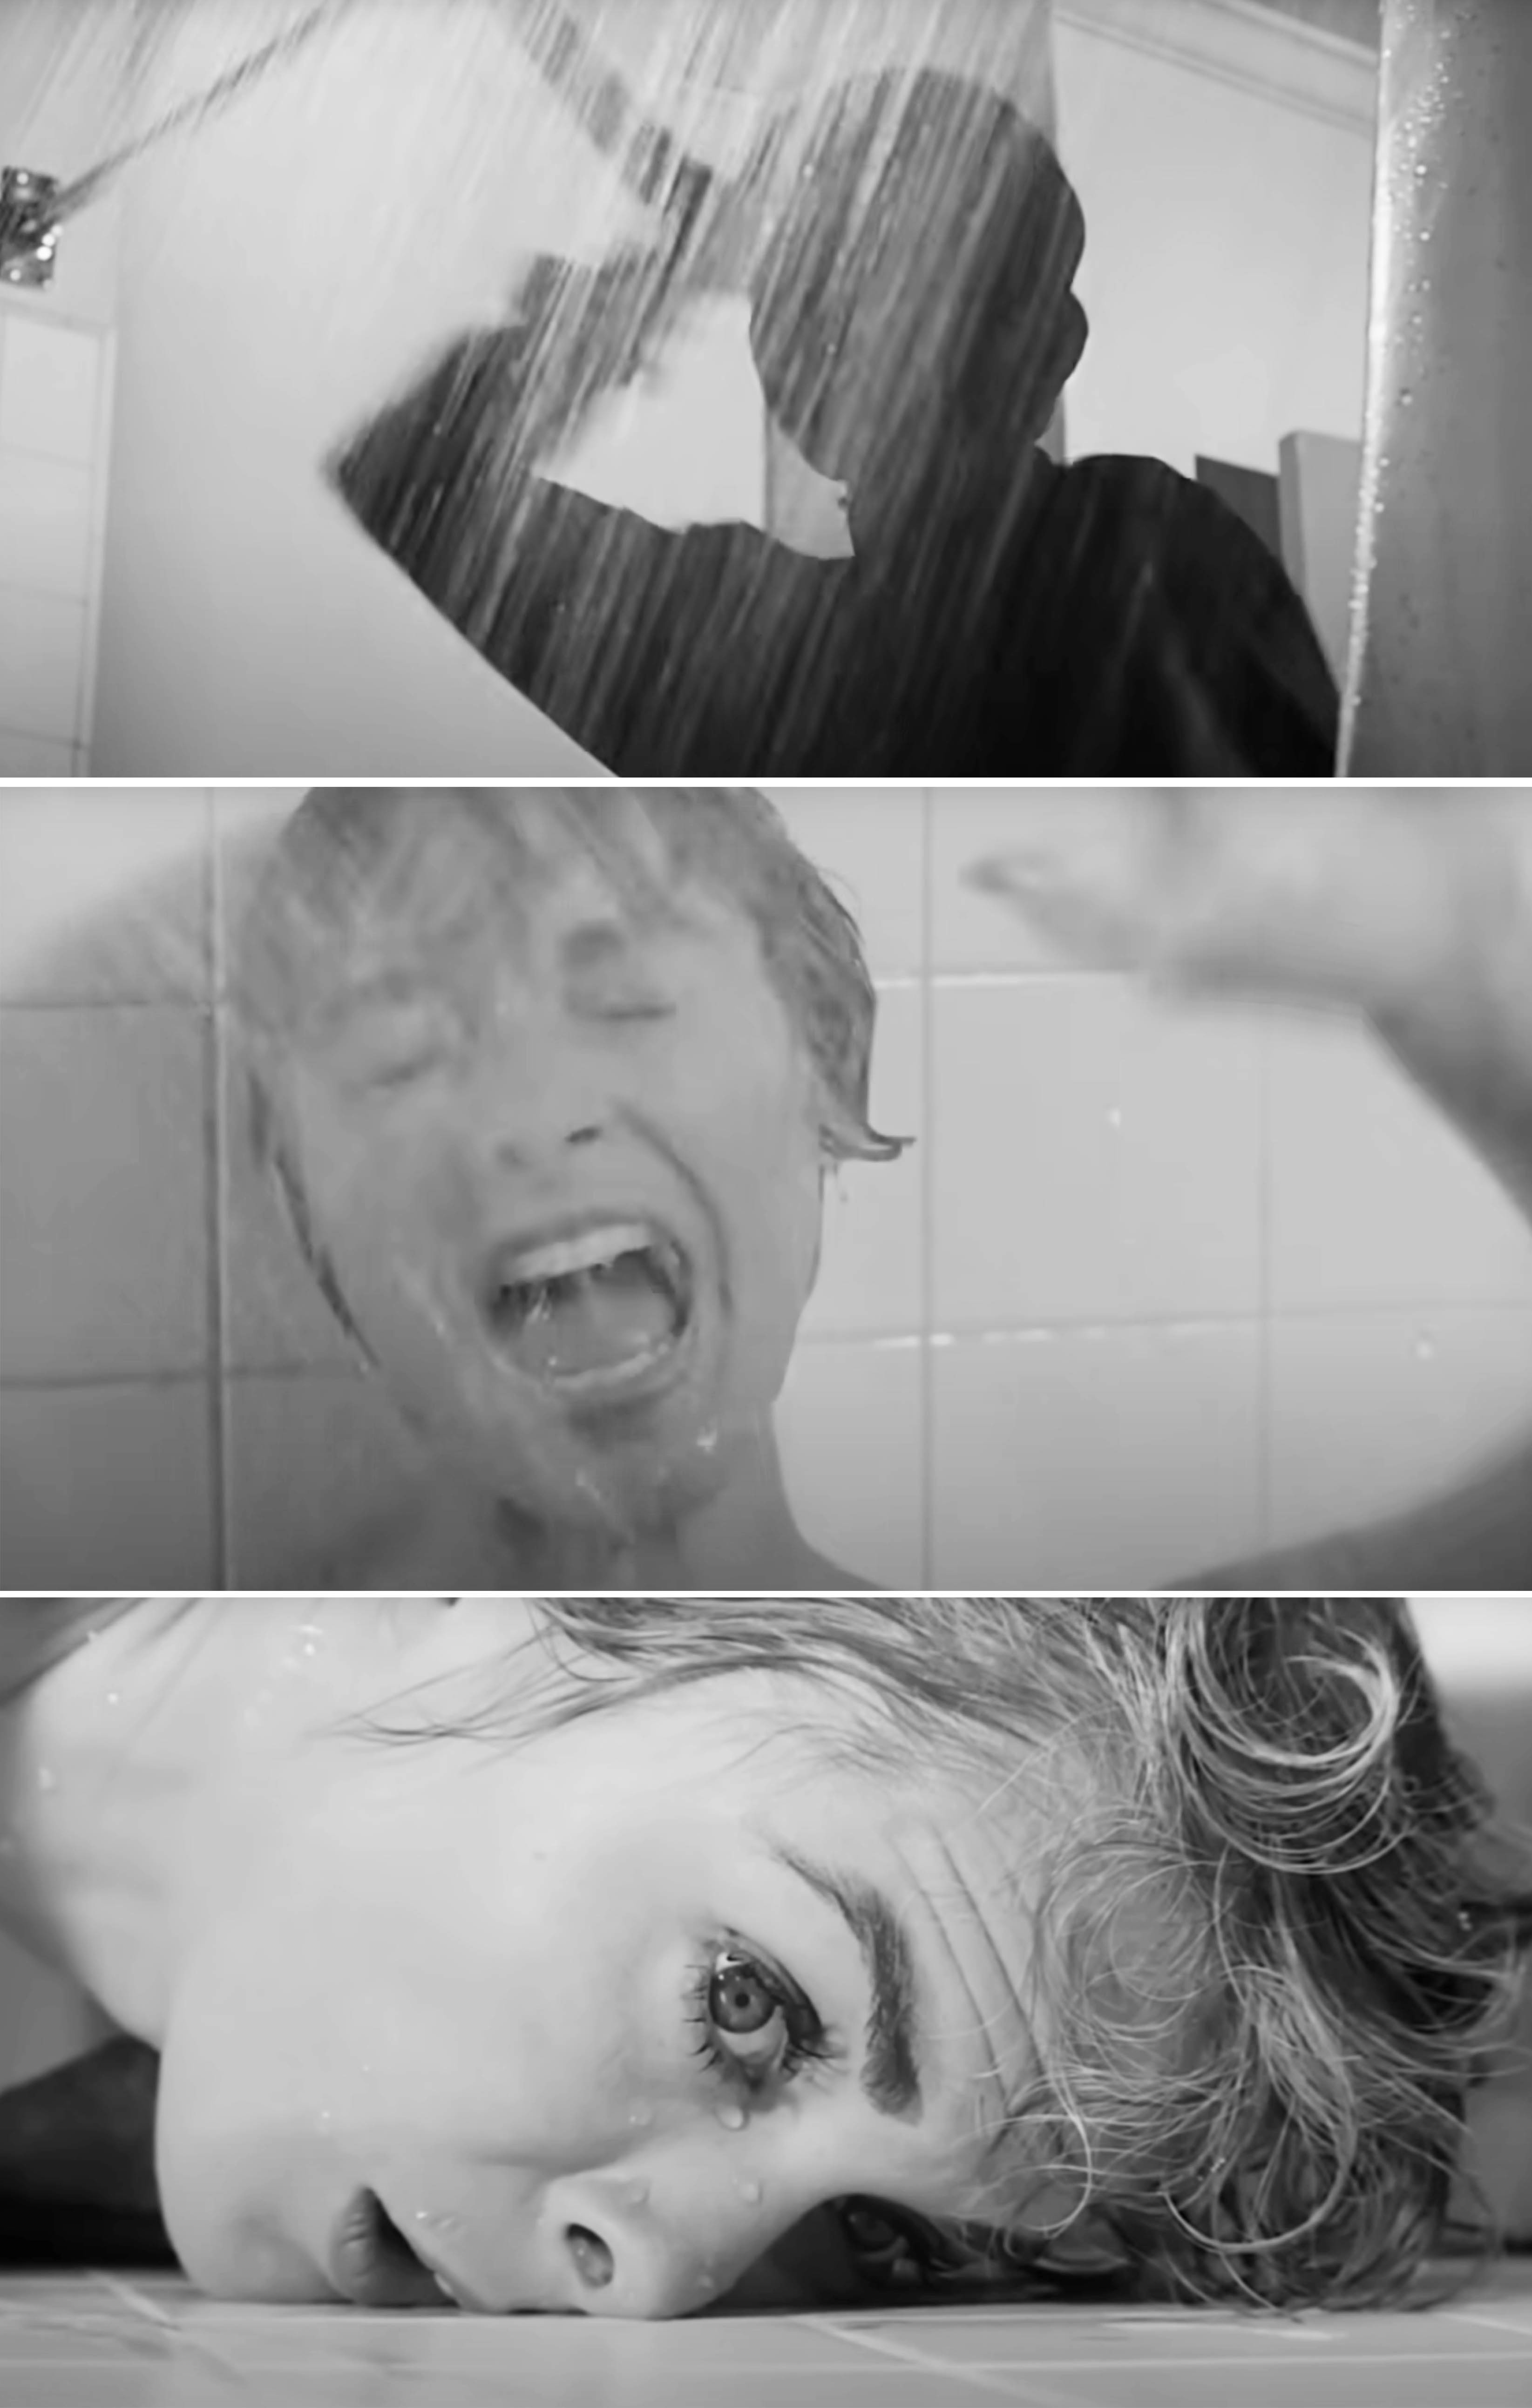 Marion Crane from Psycho is shown in three panels depicting the iconic shower scene